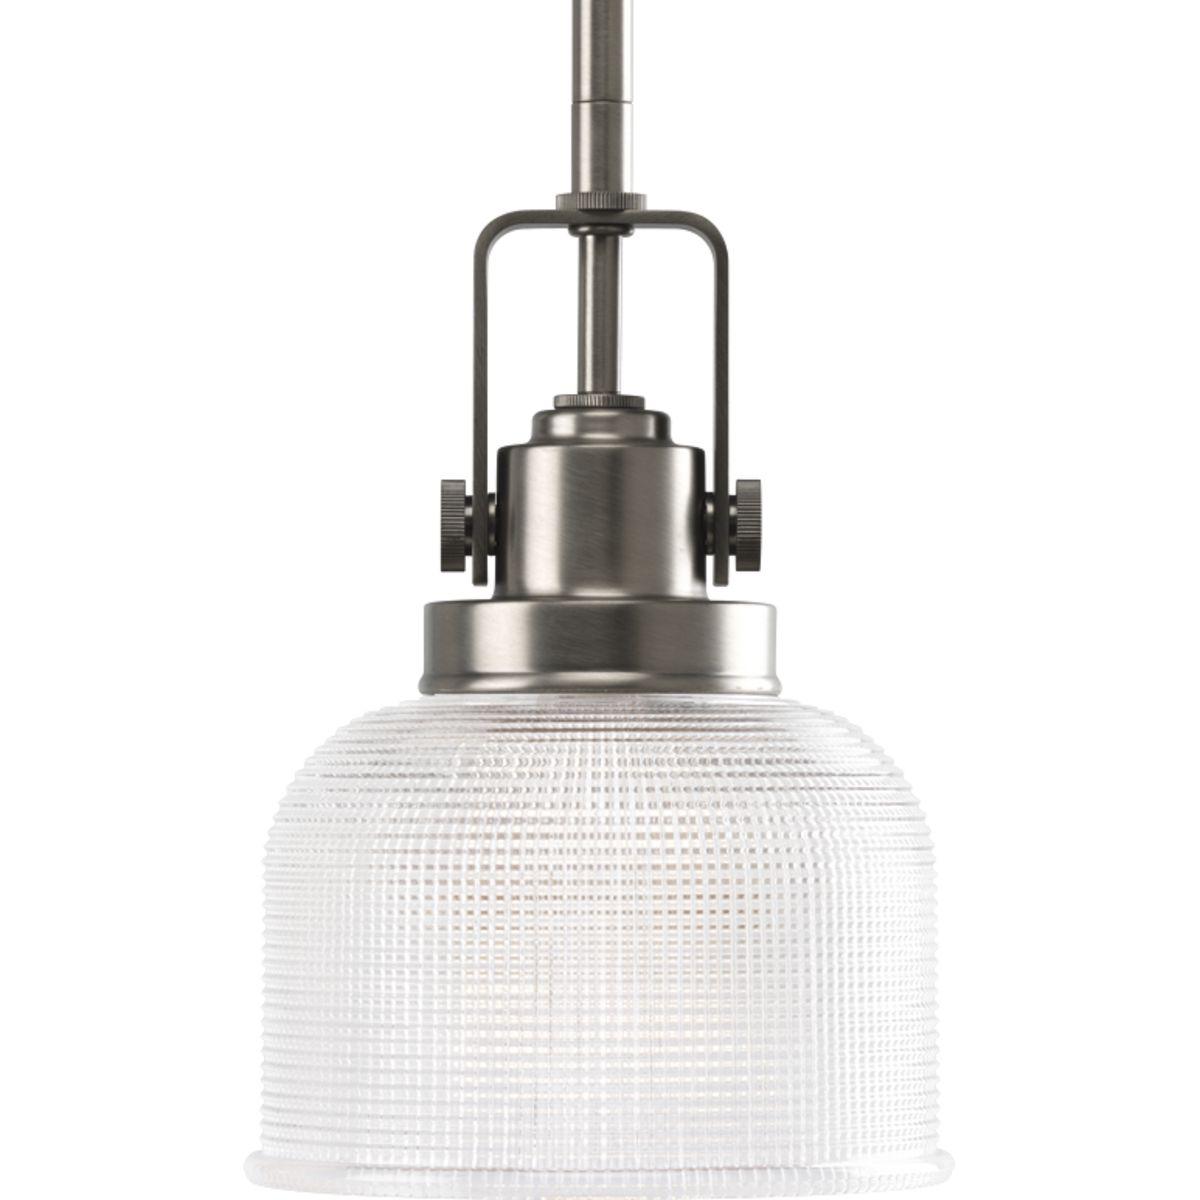 Hubbell P5173-81 The Archie Collection brings a vintage, industrial flair to interior settings. The collection’s distinctive double prismatic glass adds visual interest as its crisscross pattern comes to life when illuminated. The distinctive finely crafted strap and knob